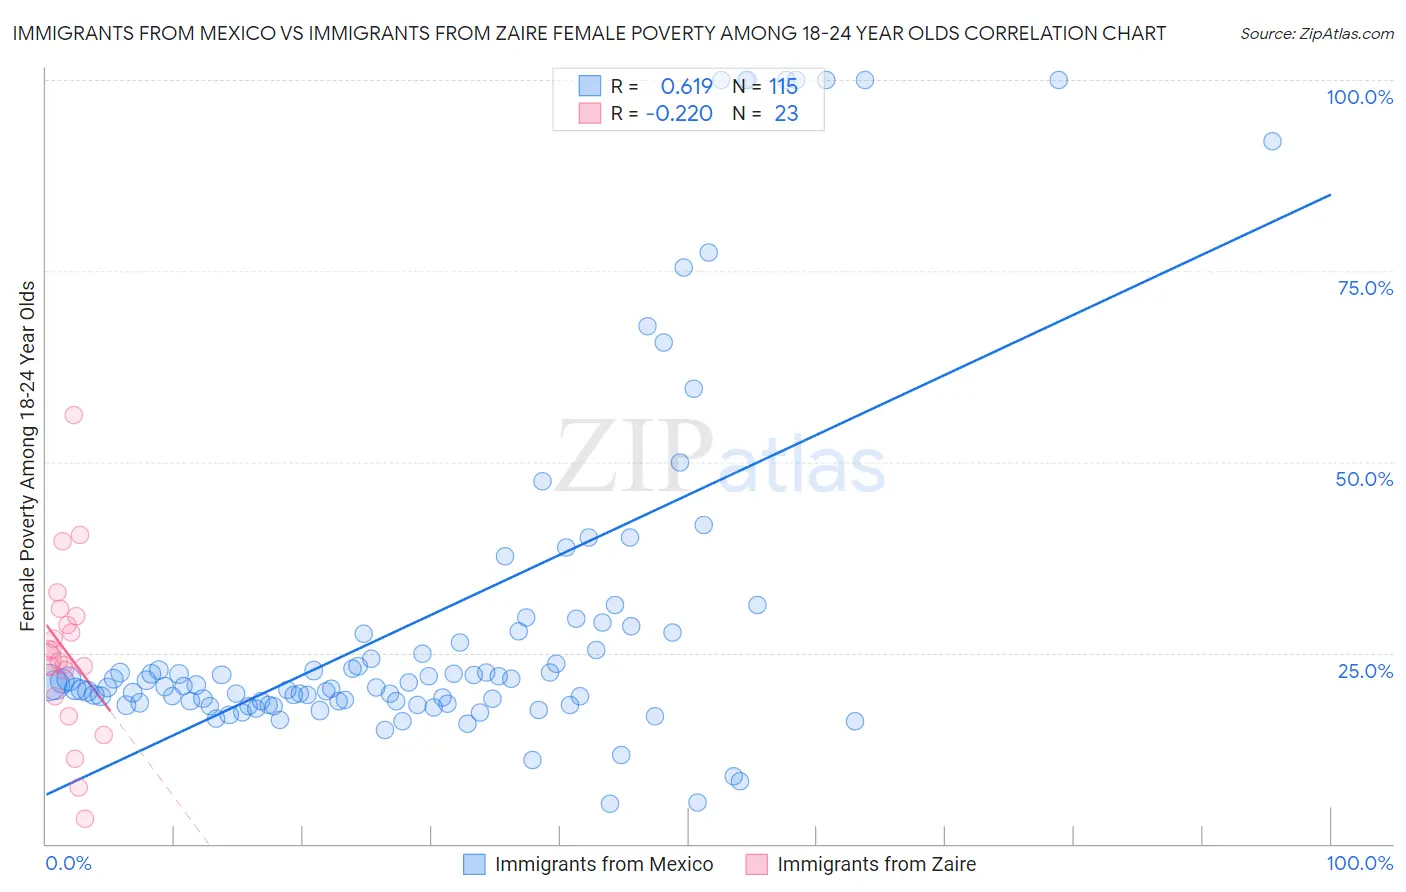 Immigrants from Mexico vs Immigrants from Zaire Female Poverty Among 18-24 Year Olds